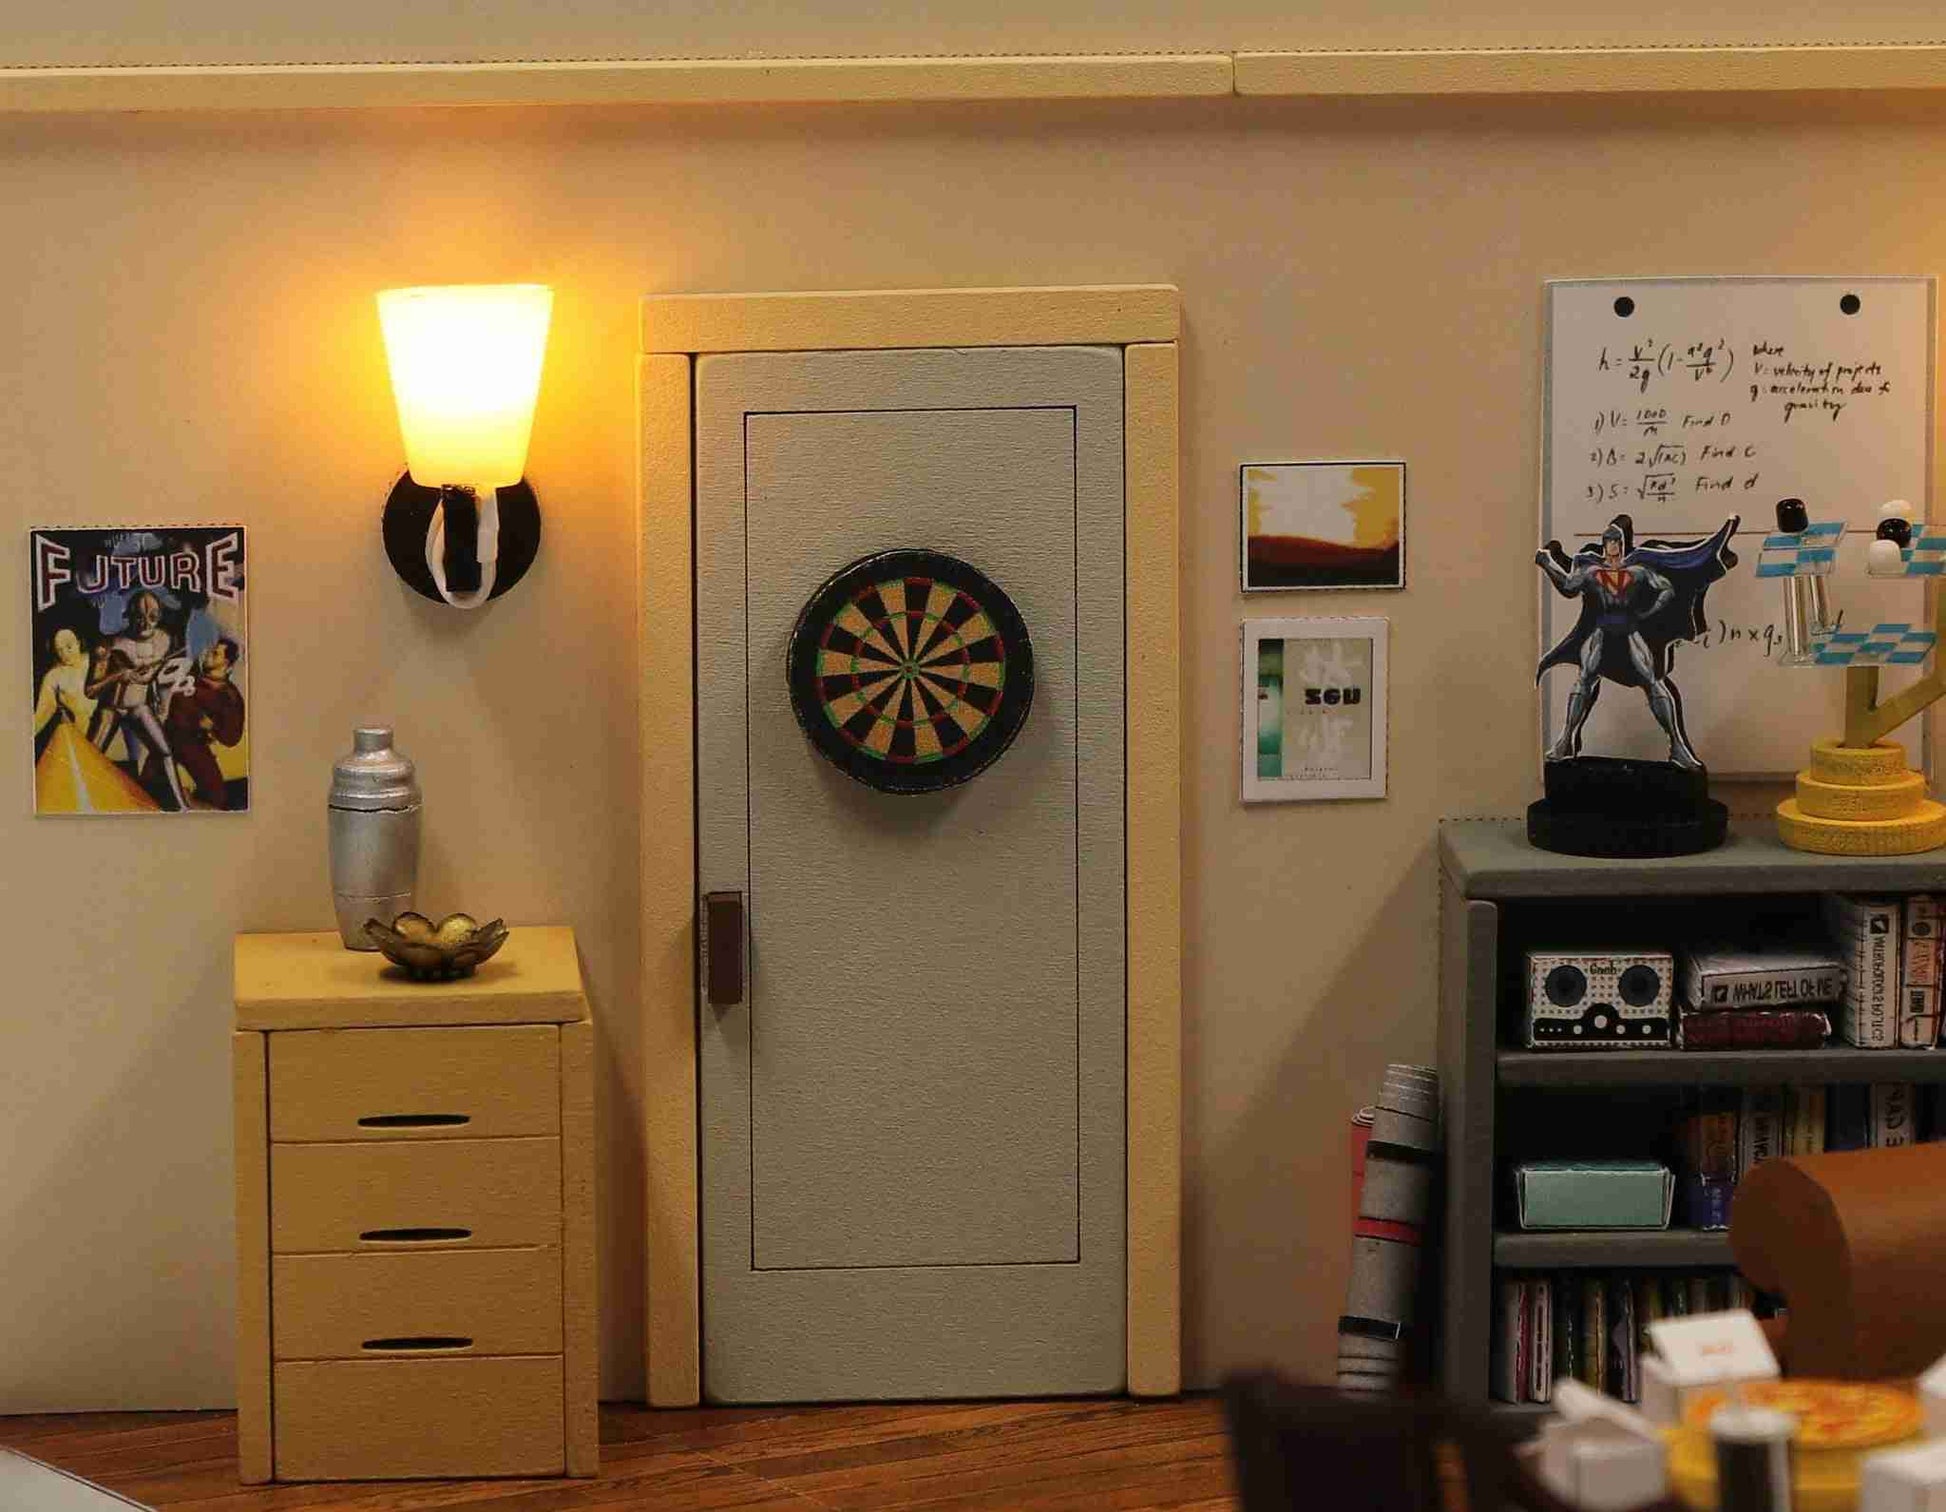 Sheldon's Apartment DIY Dollhouse Kit, a miniature house crafts inspired by the TV show "The Big Bang Theory", perfect for model building lovers, dollhouse collectors, home decor, A great DIY project for "The Big Bang Theory" fans.